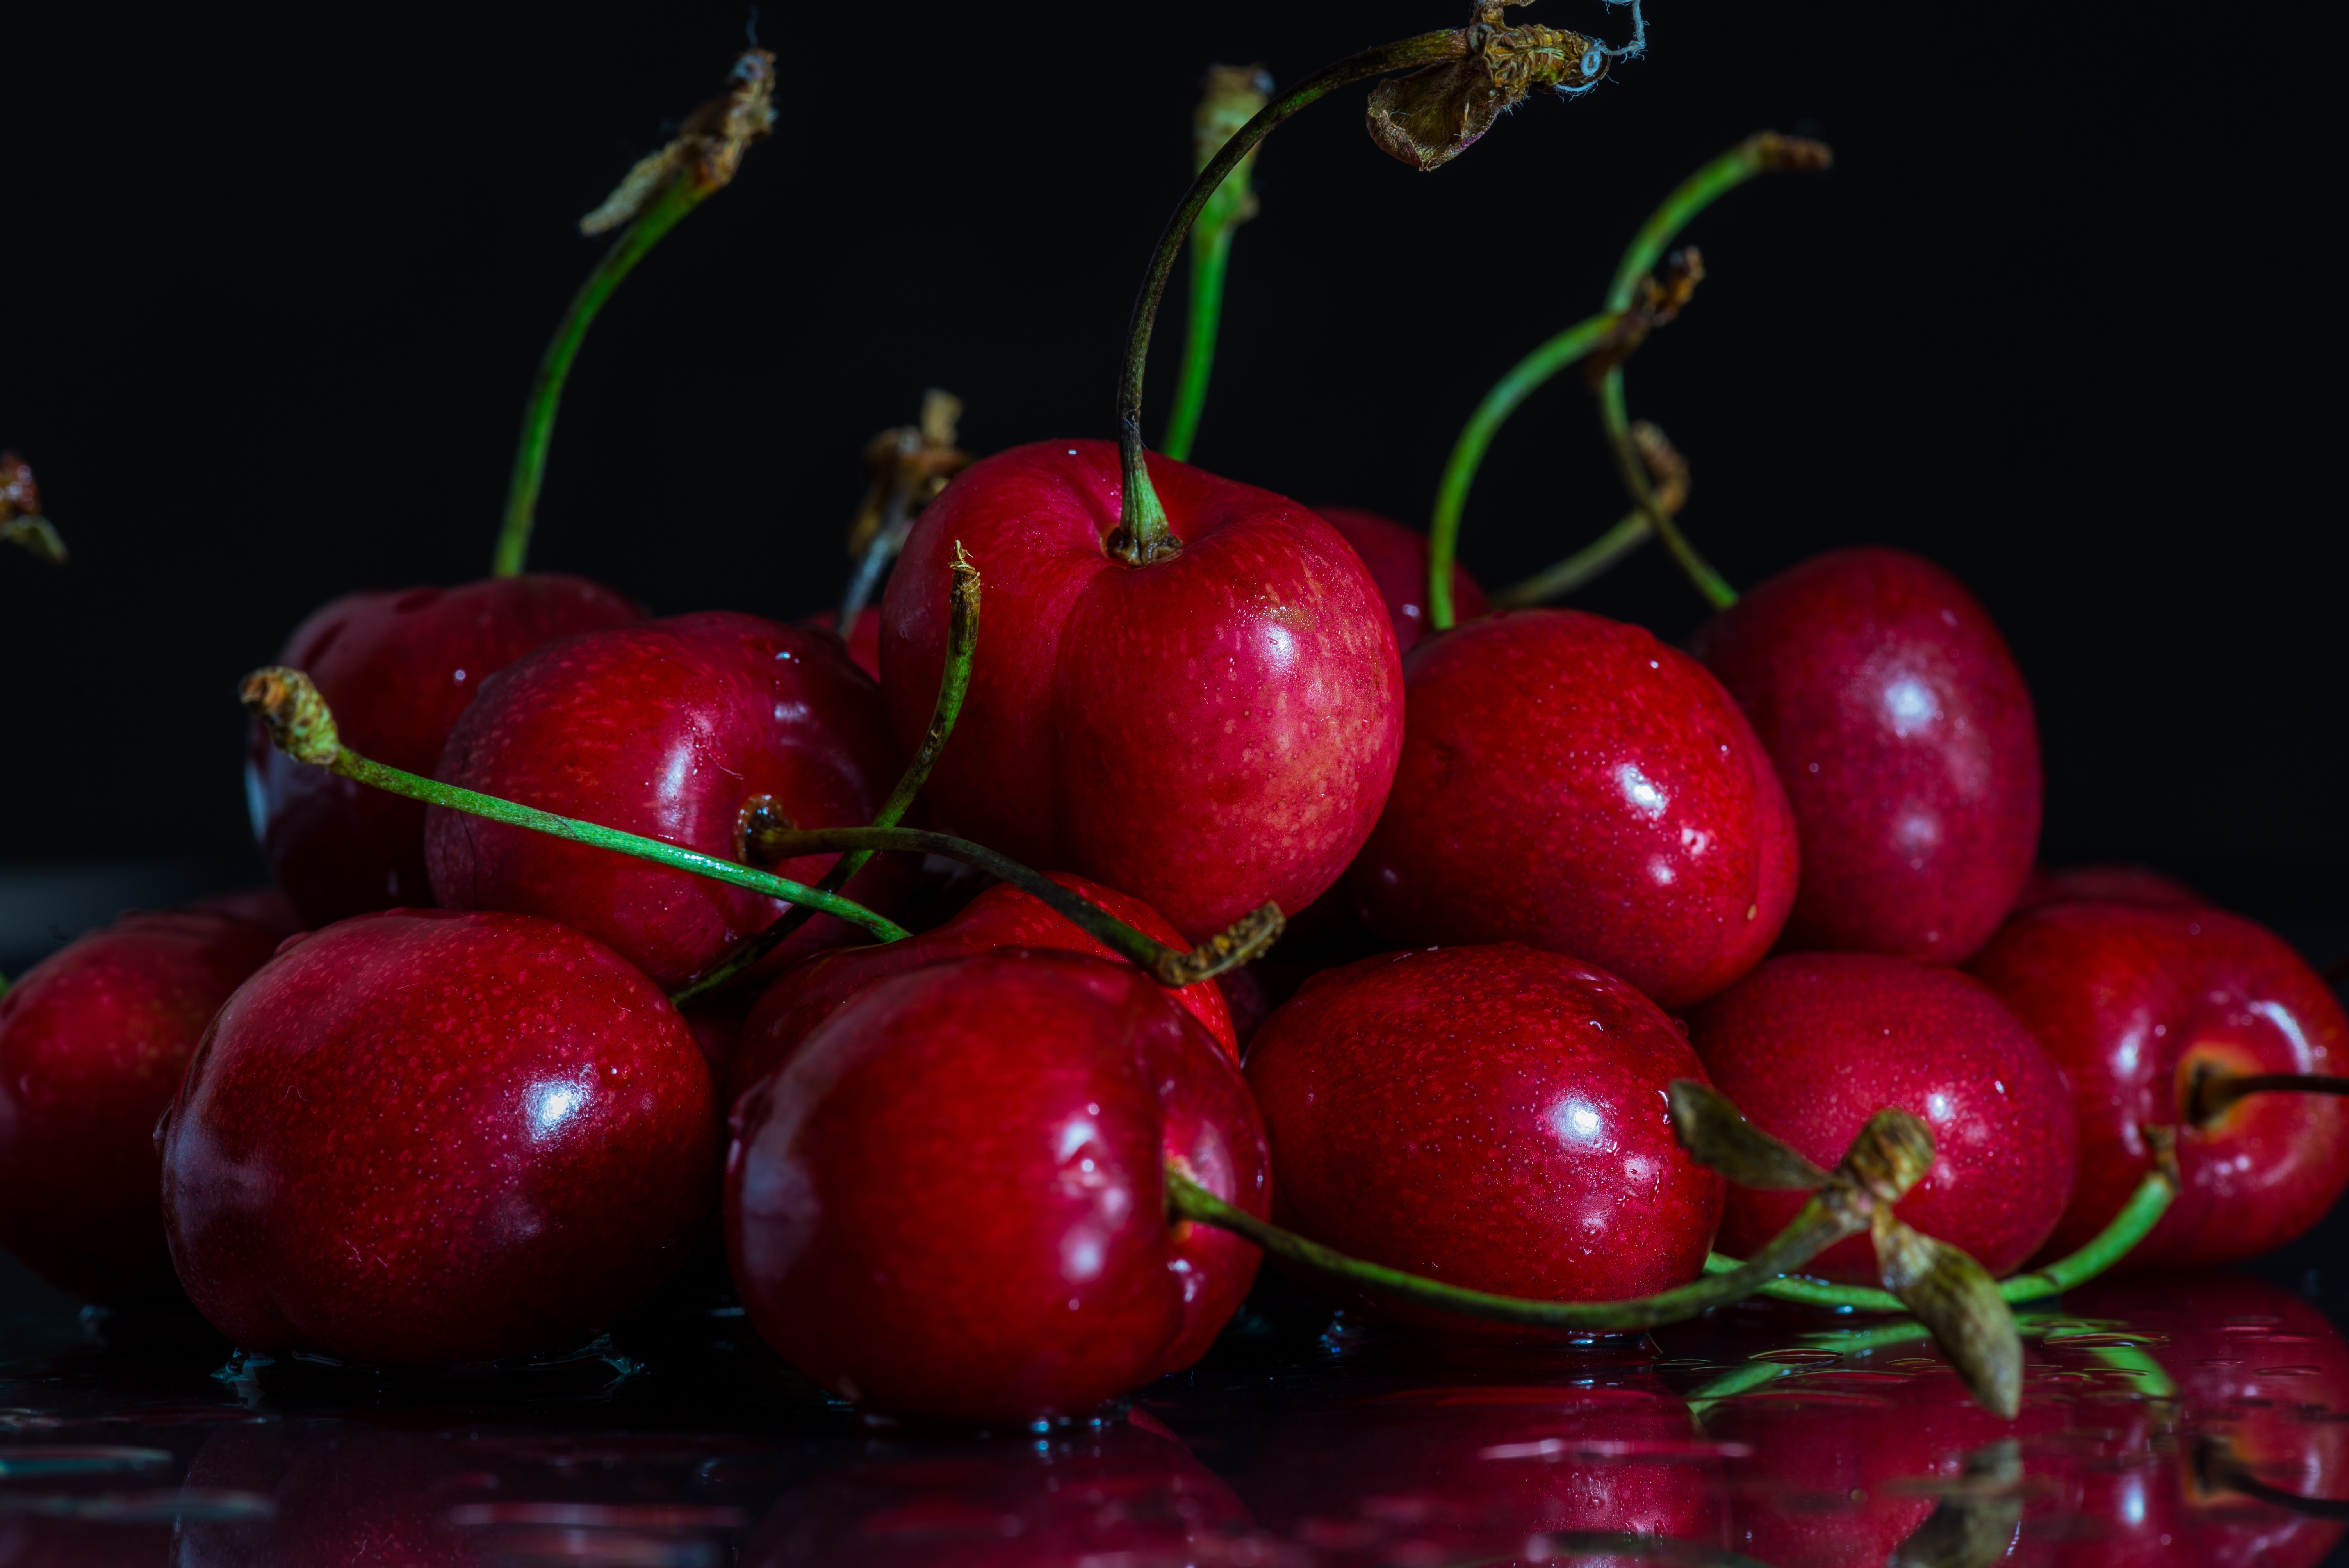 111504 free wallpaper 720x1280 for phone, download images sweet, cherry, sweet cherries, food 720x1280 for mobile